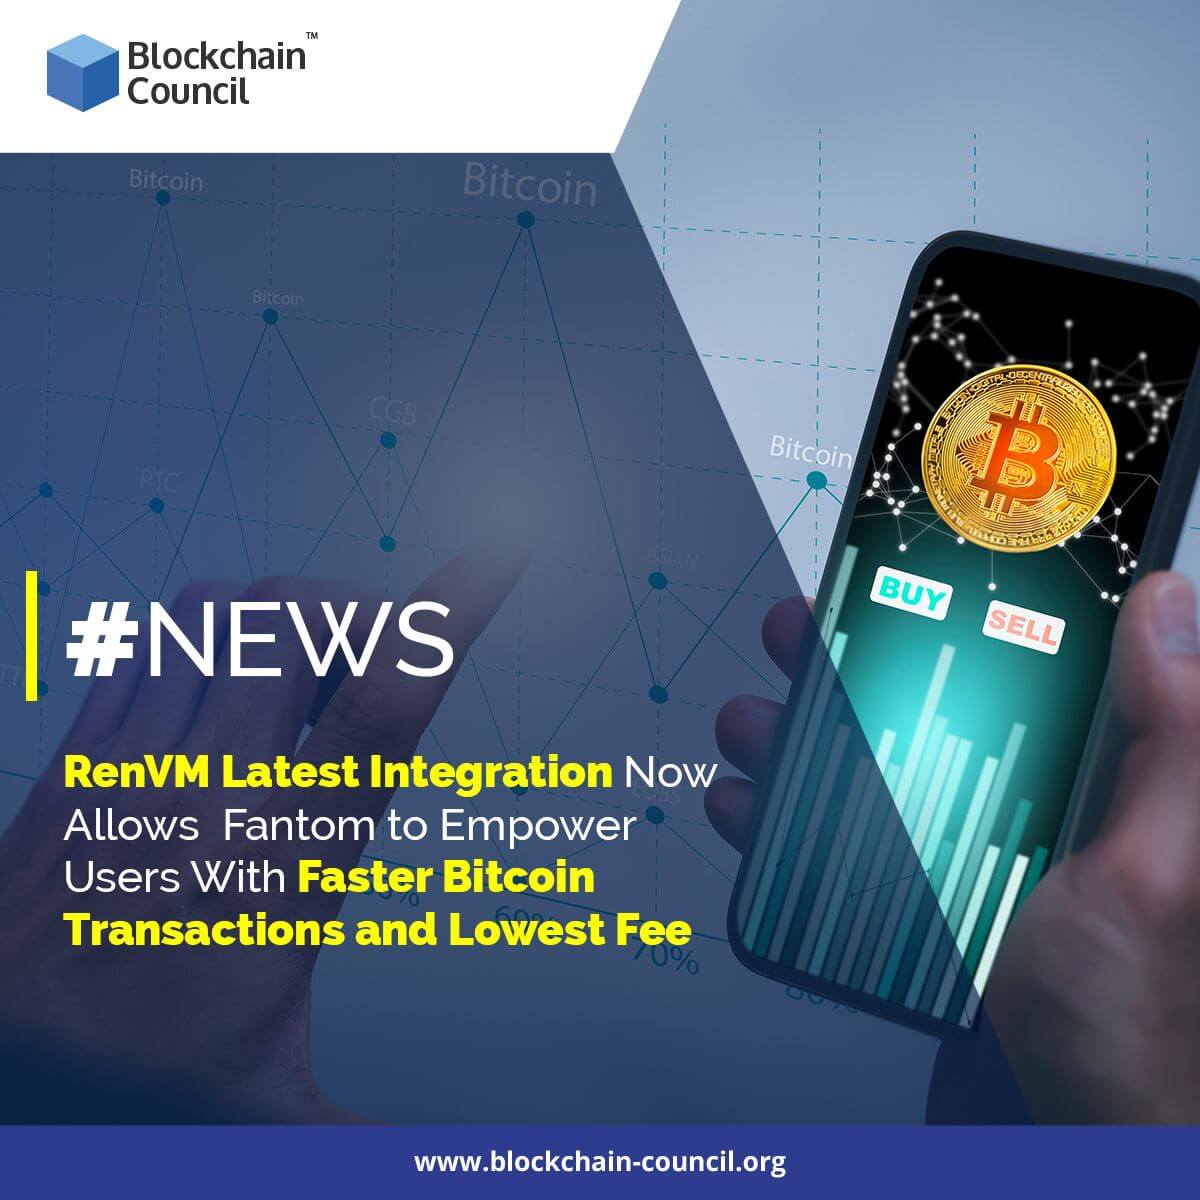 RenVM Latest Integration Now Allows Fantom to Empower Users With Faster Bitcoin Transactions and Lowest Fee